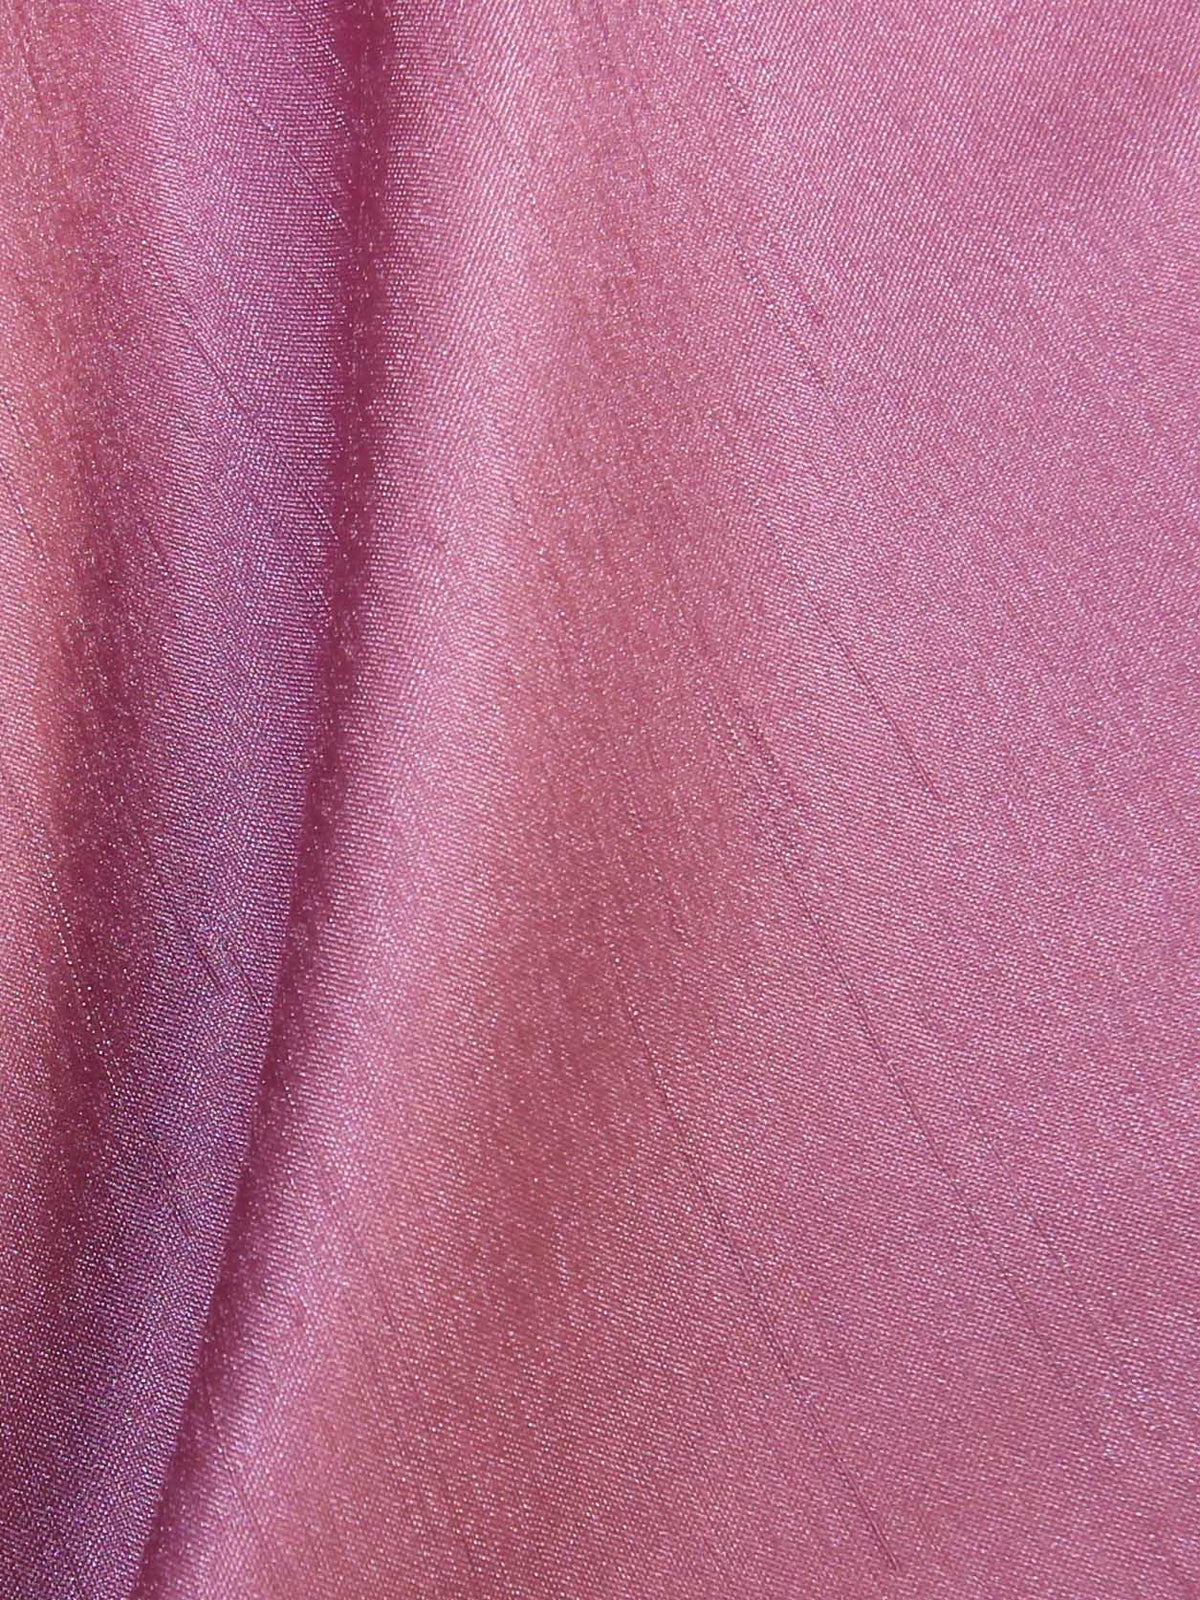 Sorbet Polyester Satin Backed Dupion - Clarity